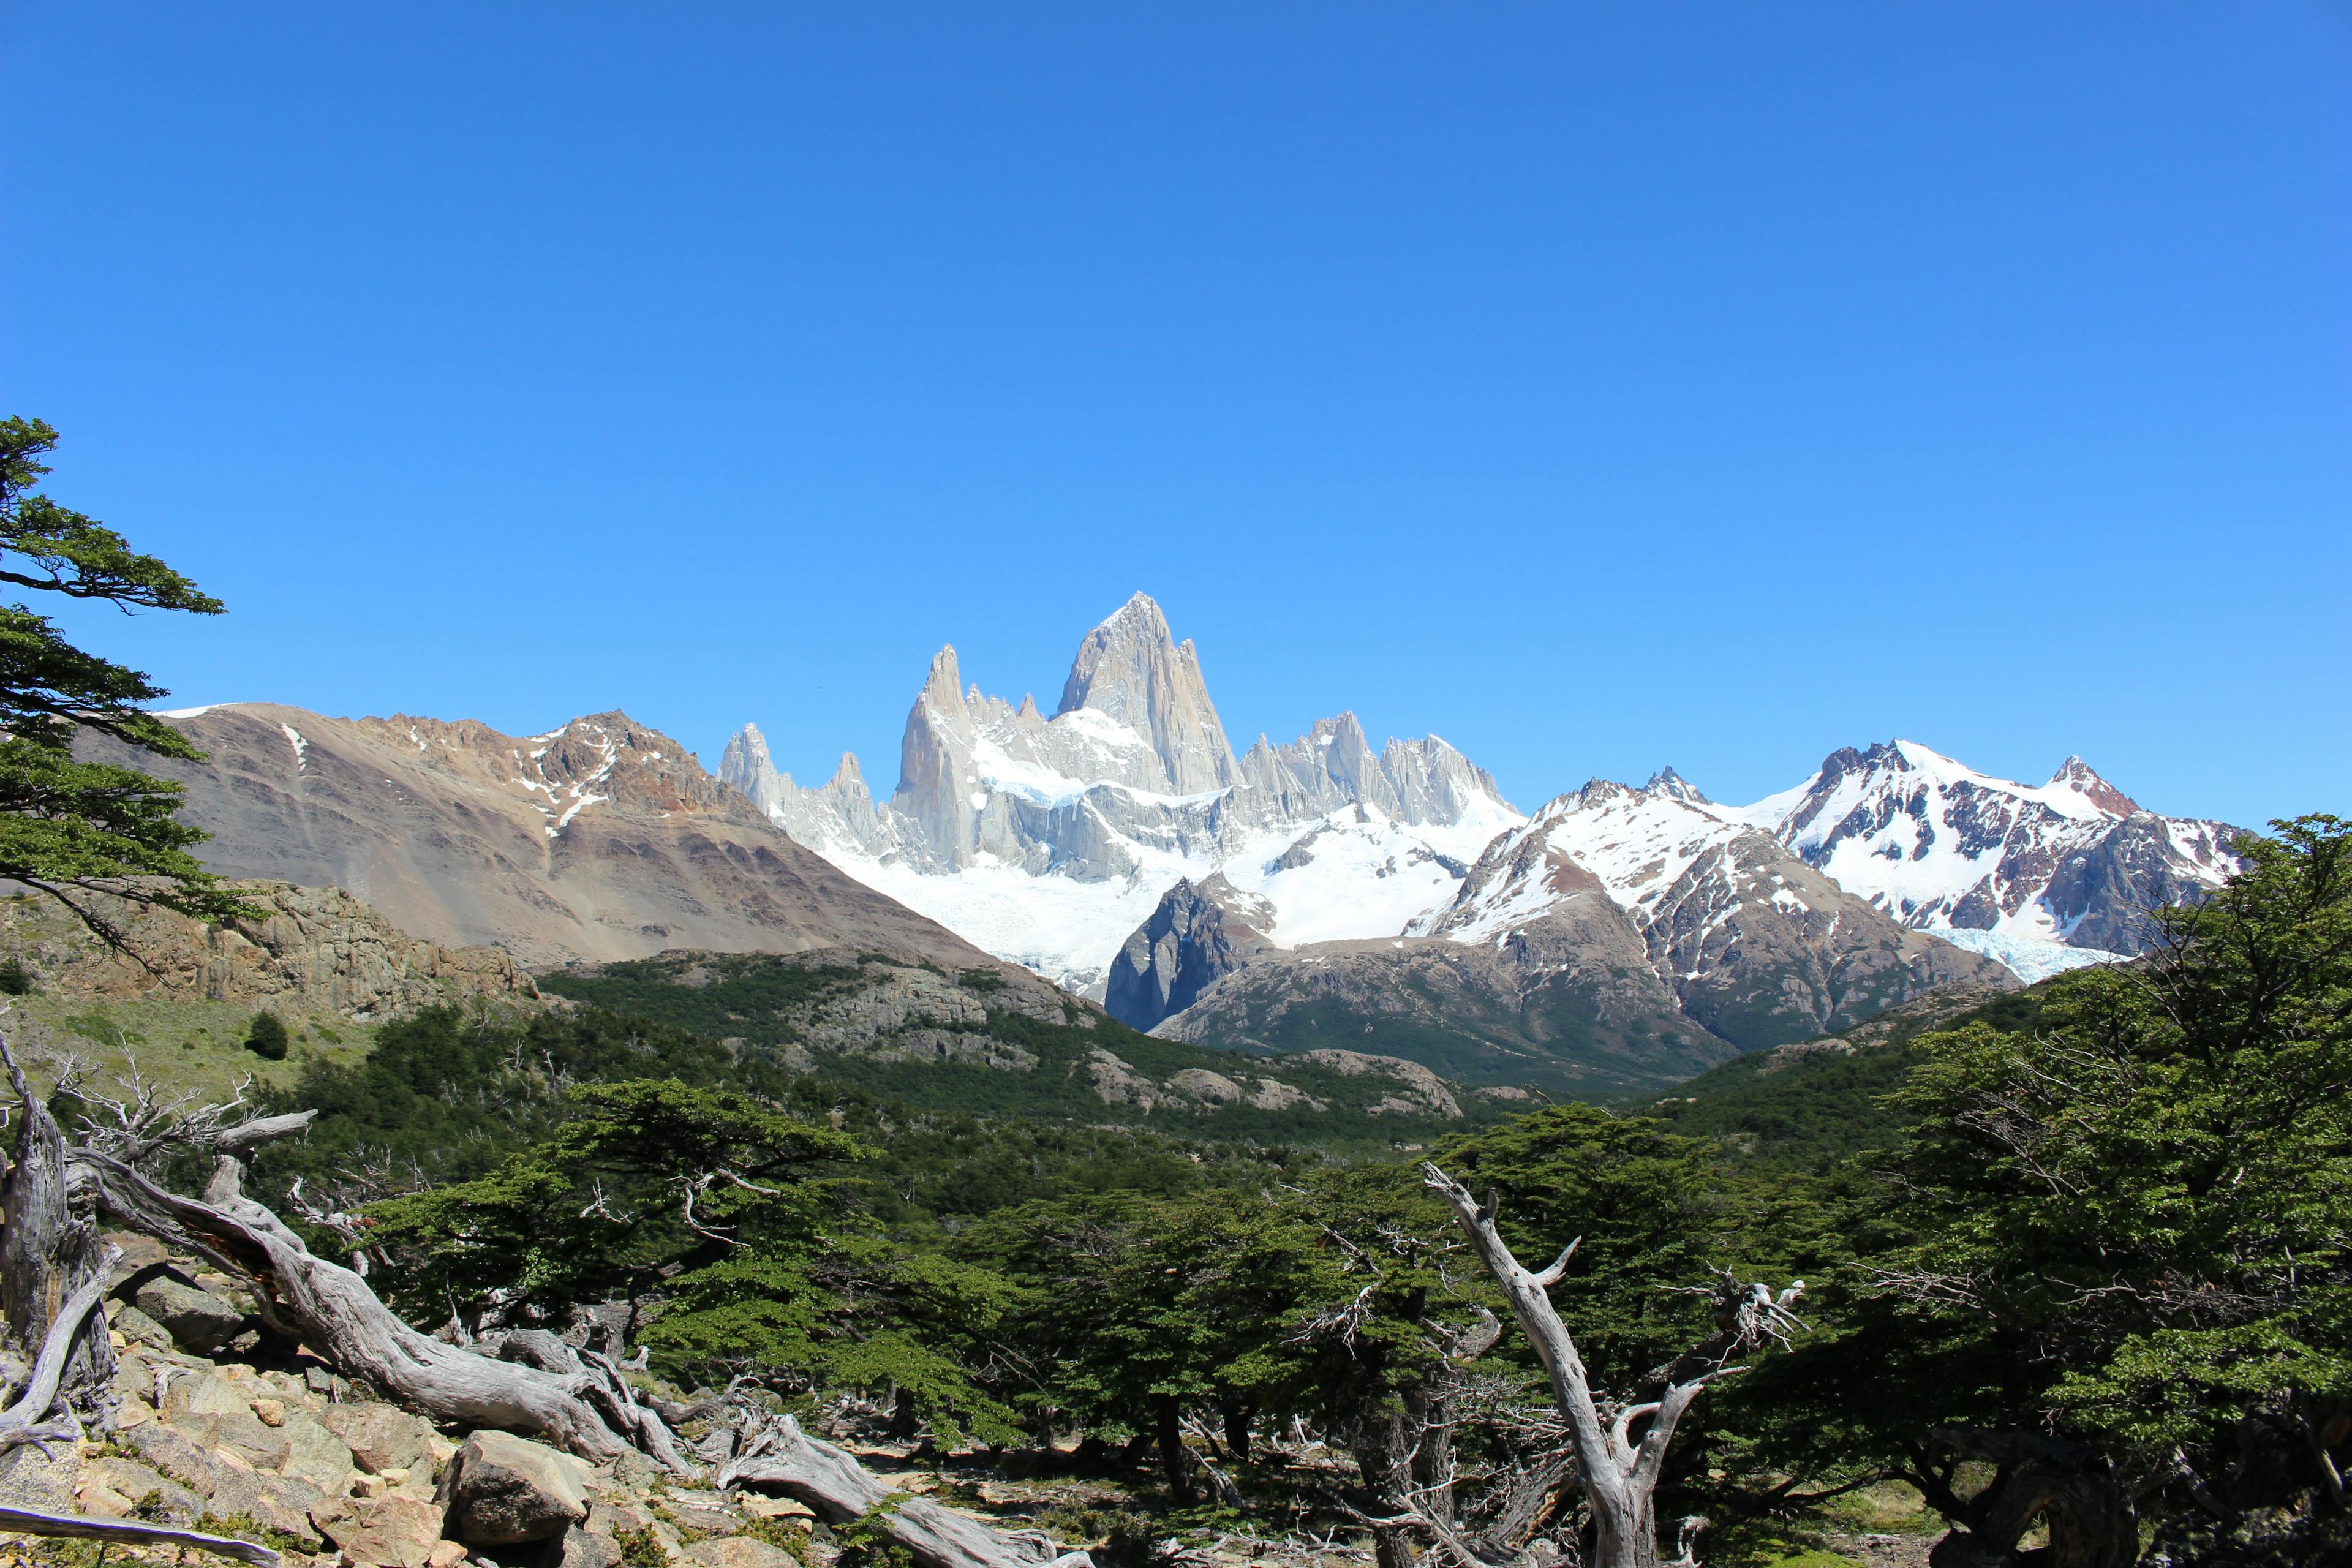 Cover Image for Hiking Fitz Roy from El Chaltén